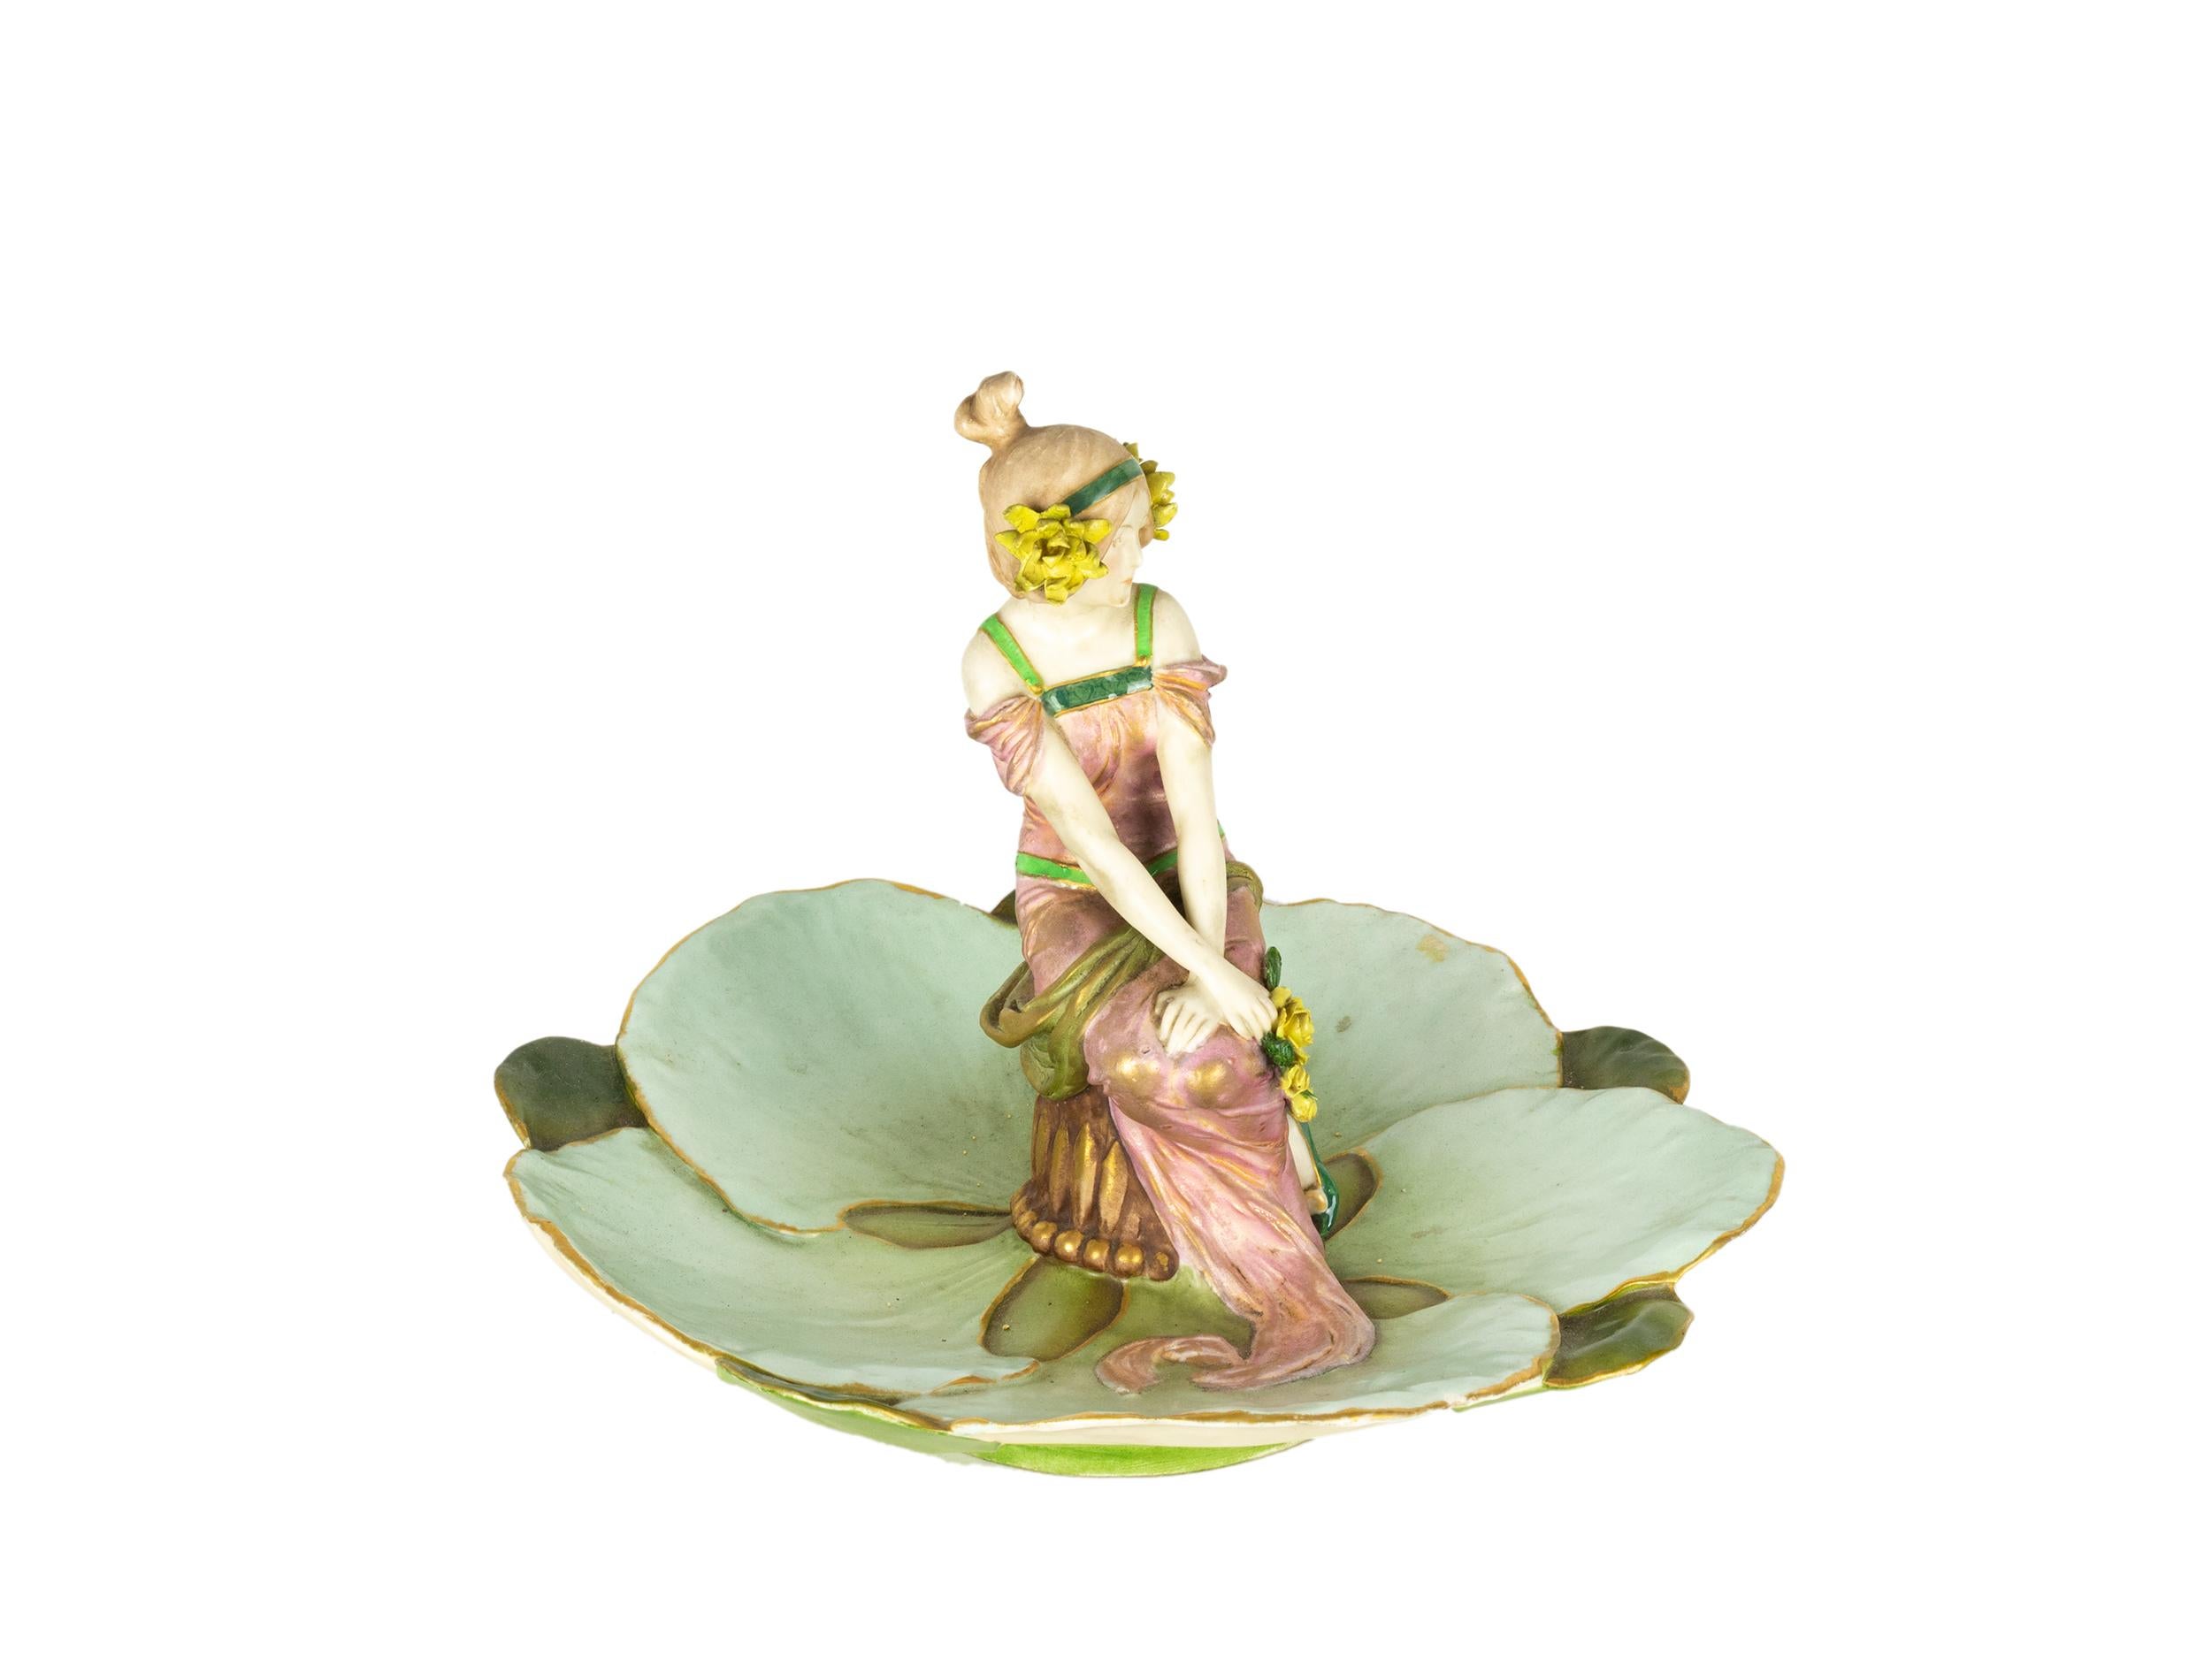 An extraordinary Secession Style Ernst Wahliss hand-painted porcelain figurine tray with a elegant seated maiden flanked by a green lilypad.
Made in Teplitz (Austria) 
Circa 1891
”Turn Wiess Depose Made in Austria